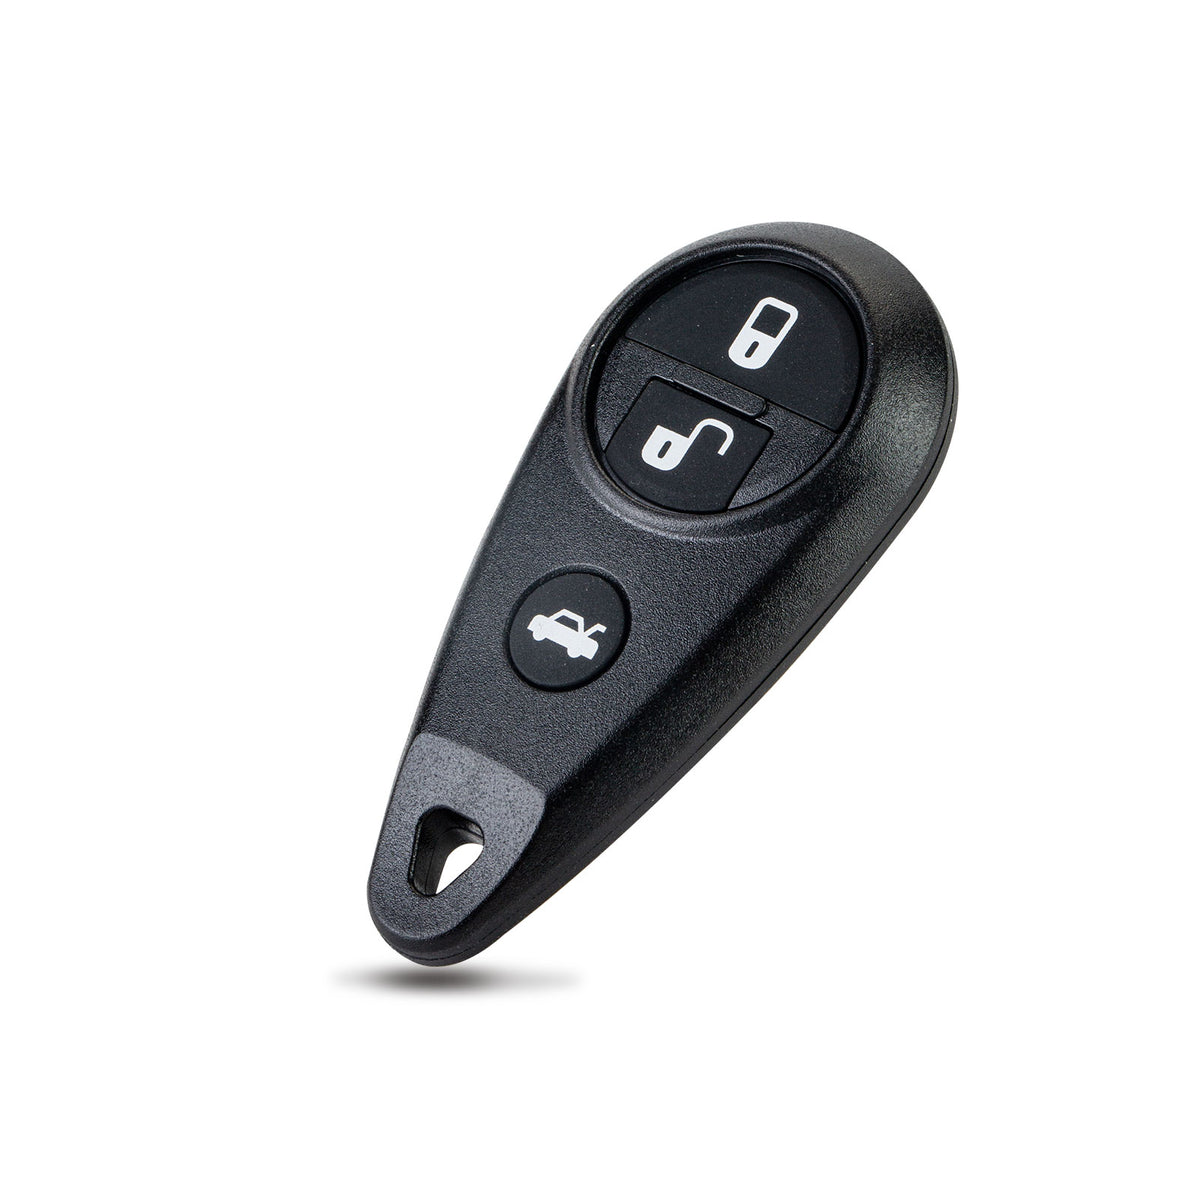 Extra-Partss Remote Car Key Fob Replacement for Subaru CWTWB1U819 fits 2011 2012 2013 Legacy Outback